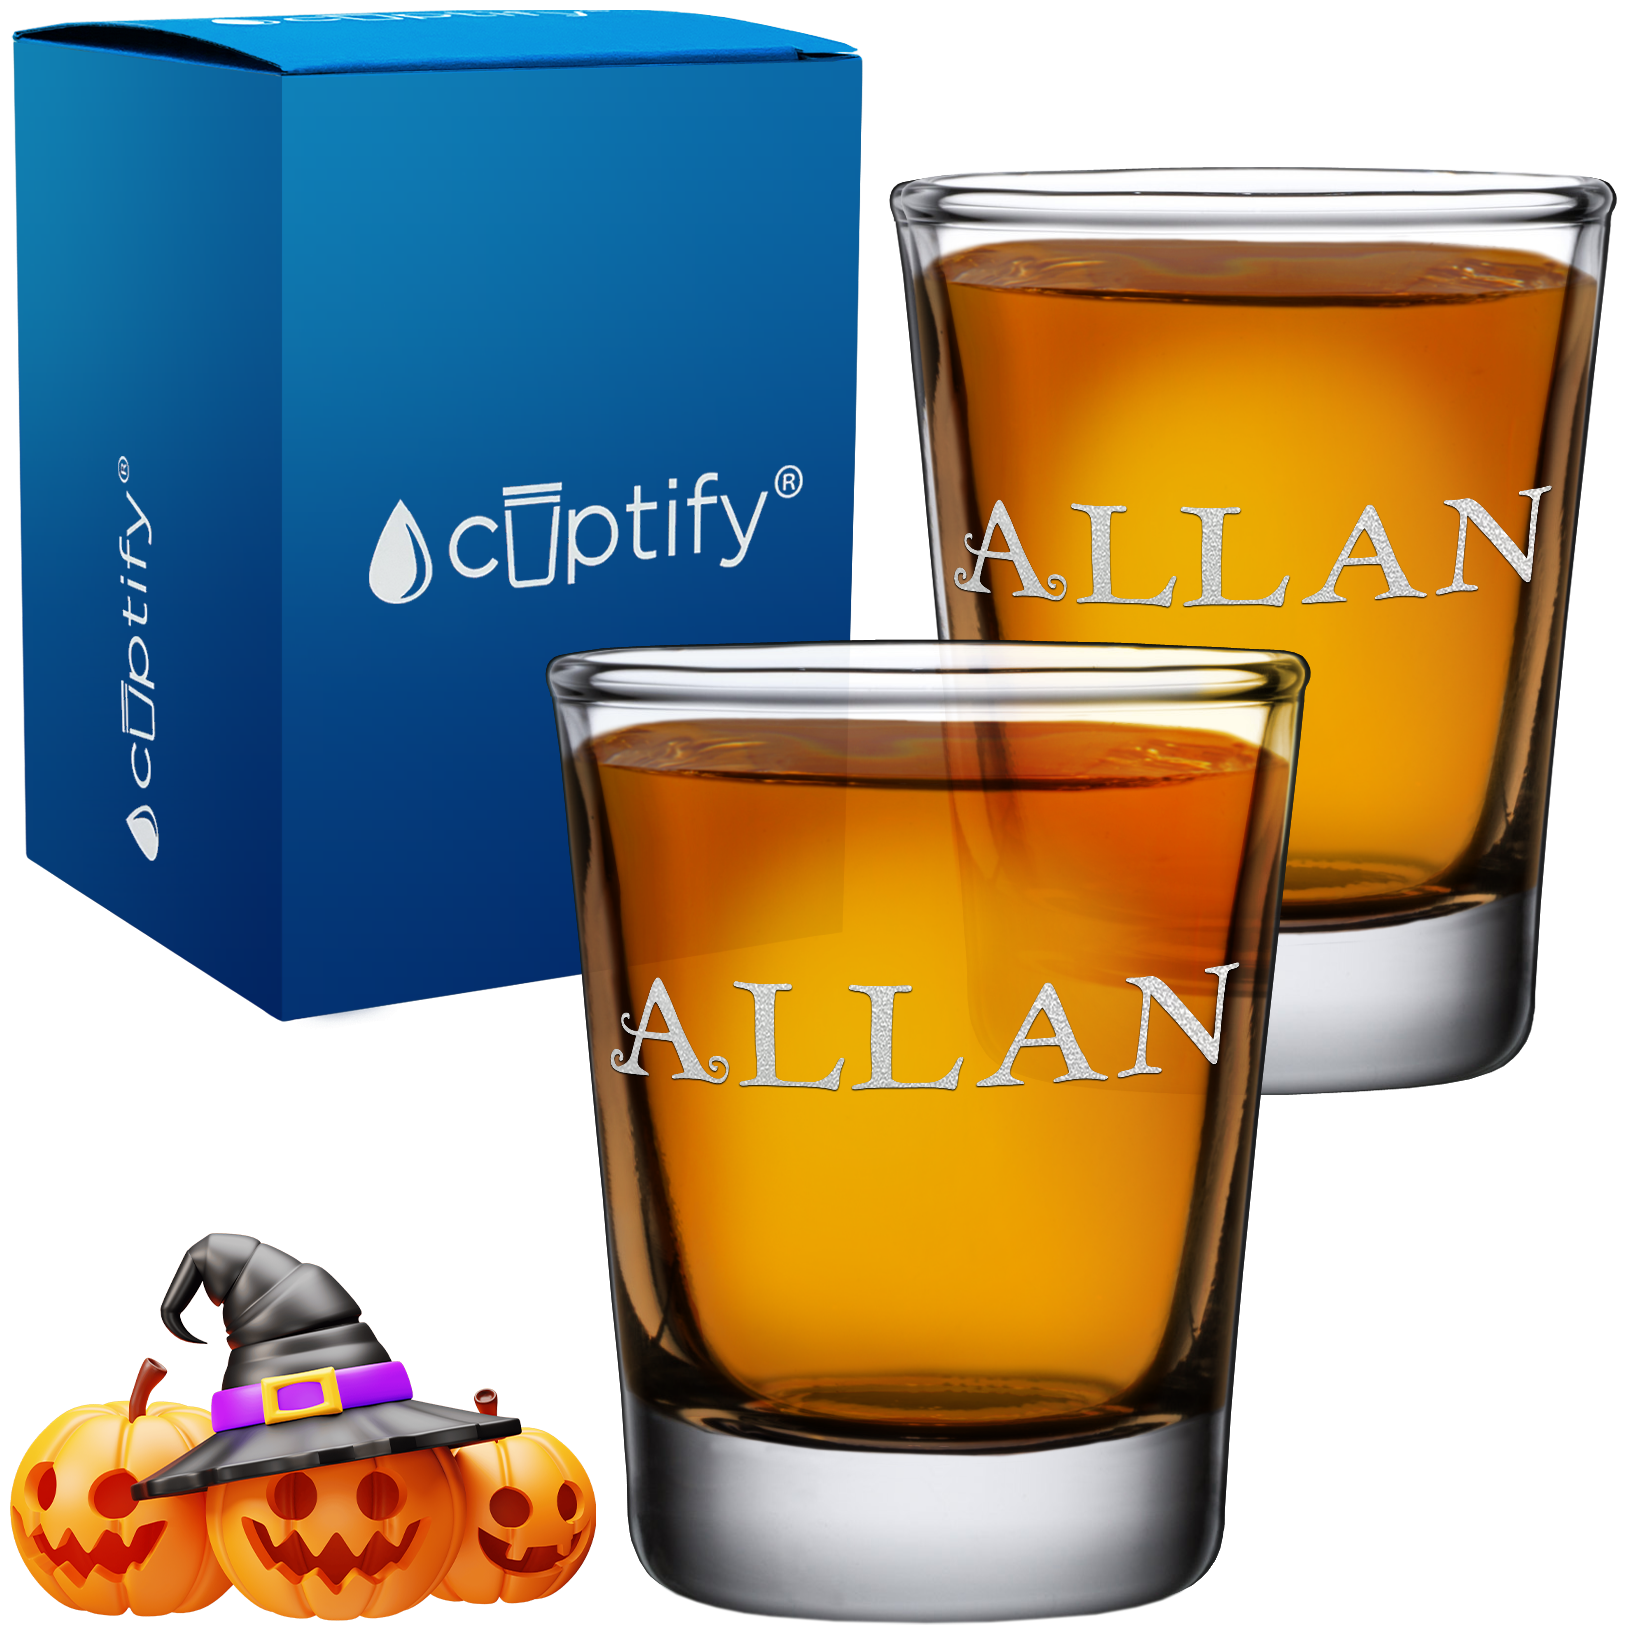 Personalized Eerie Halloween Font 2oz Shot Glasses - Set of 2